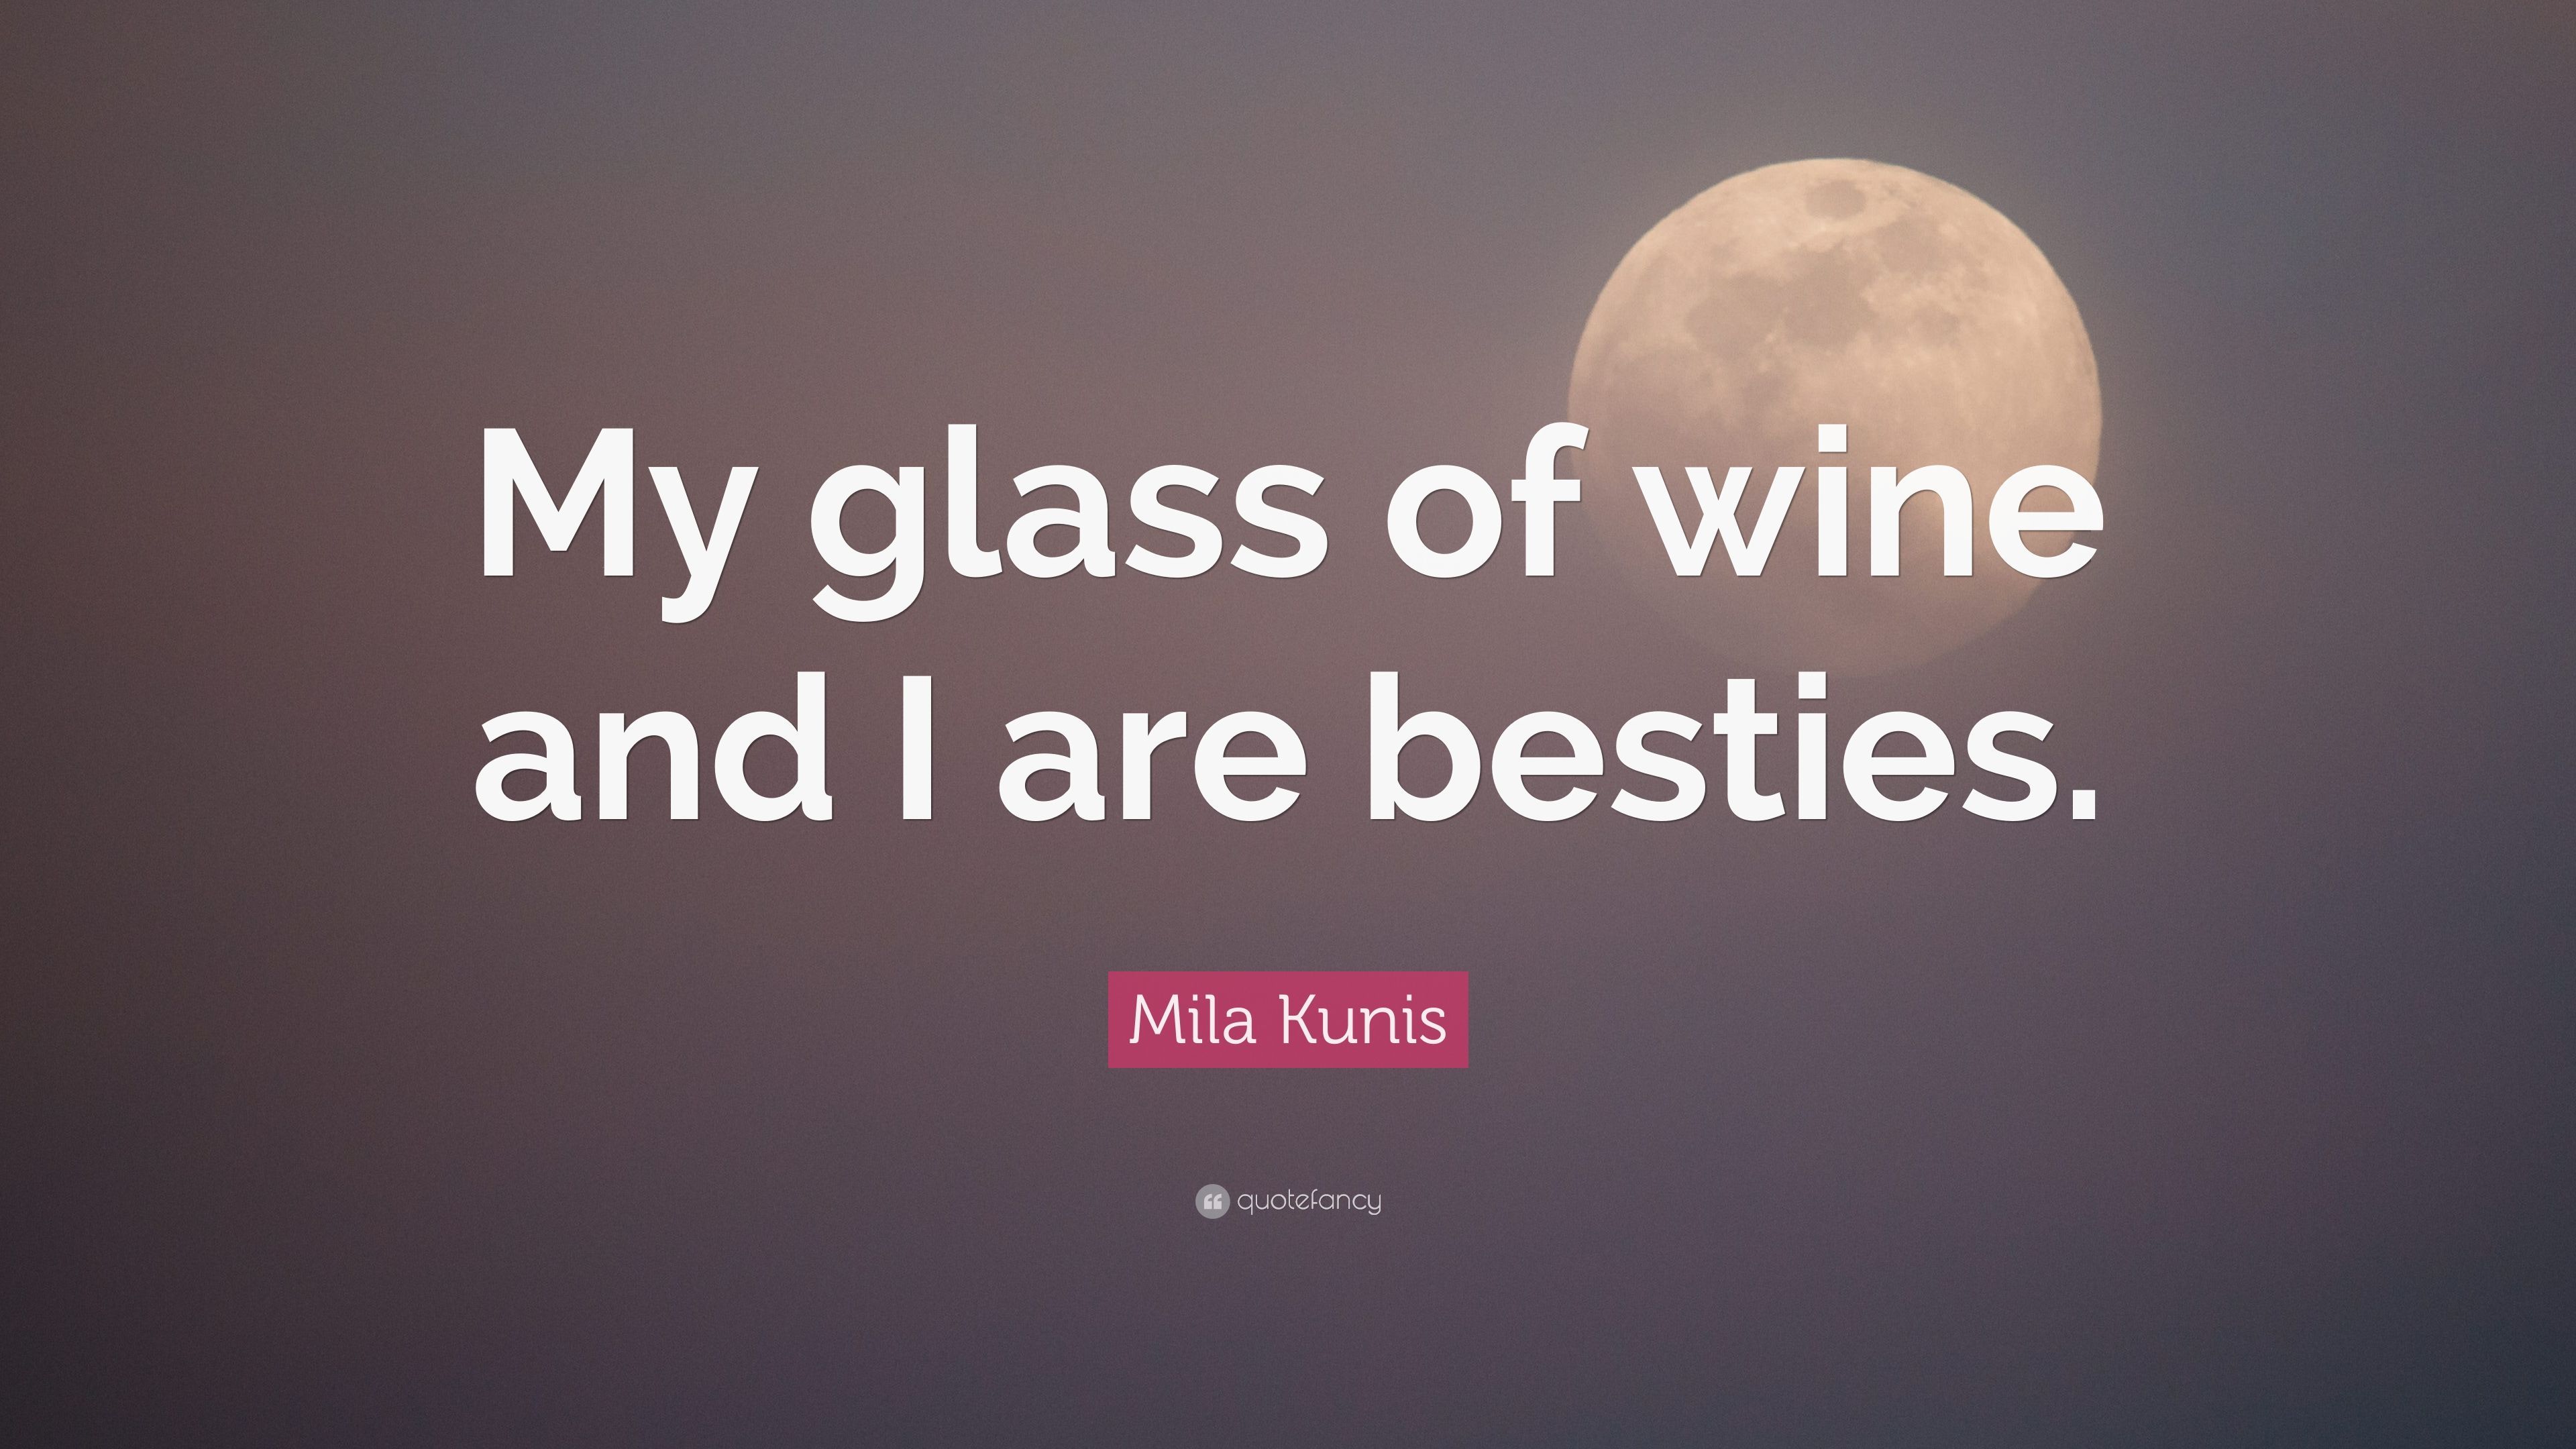 Mila Kunis Quote: “My glass of wine and I are besties.” 7